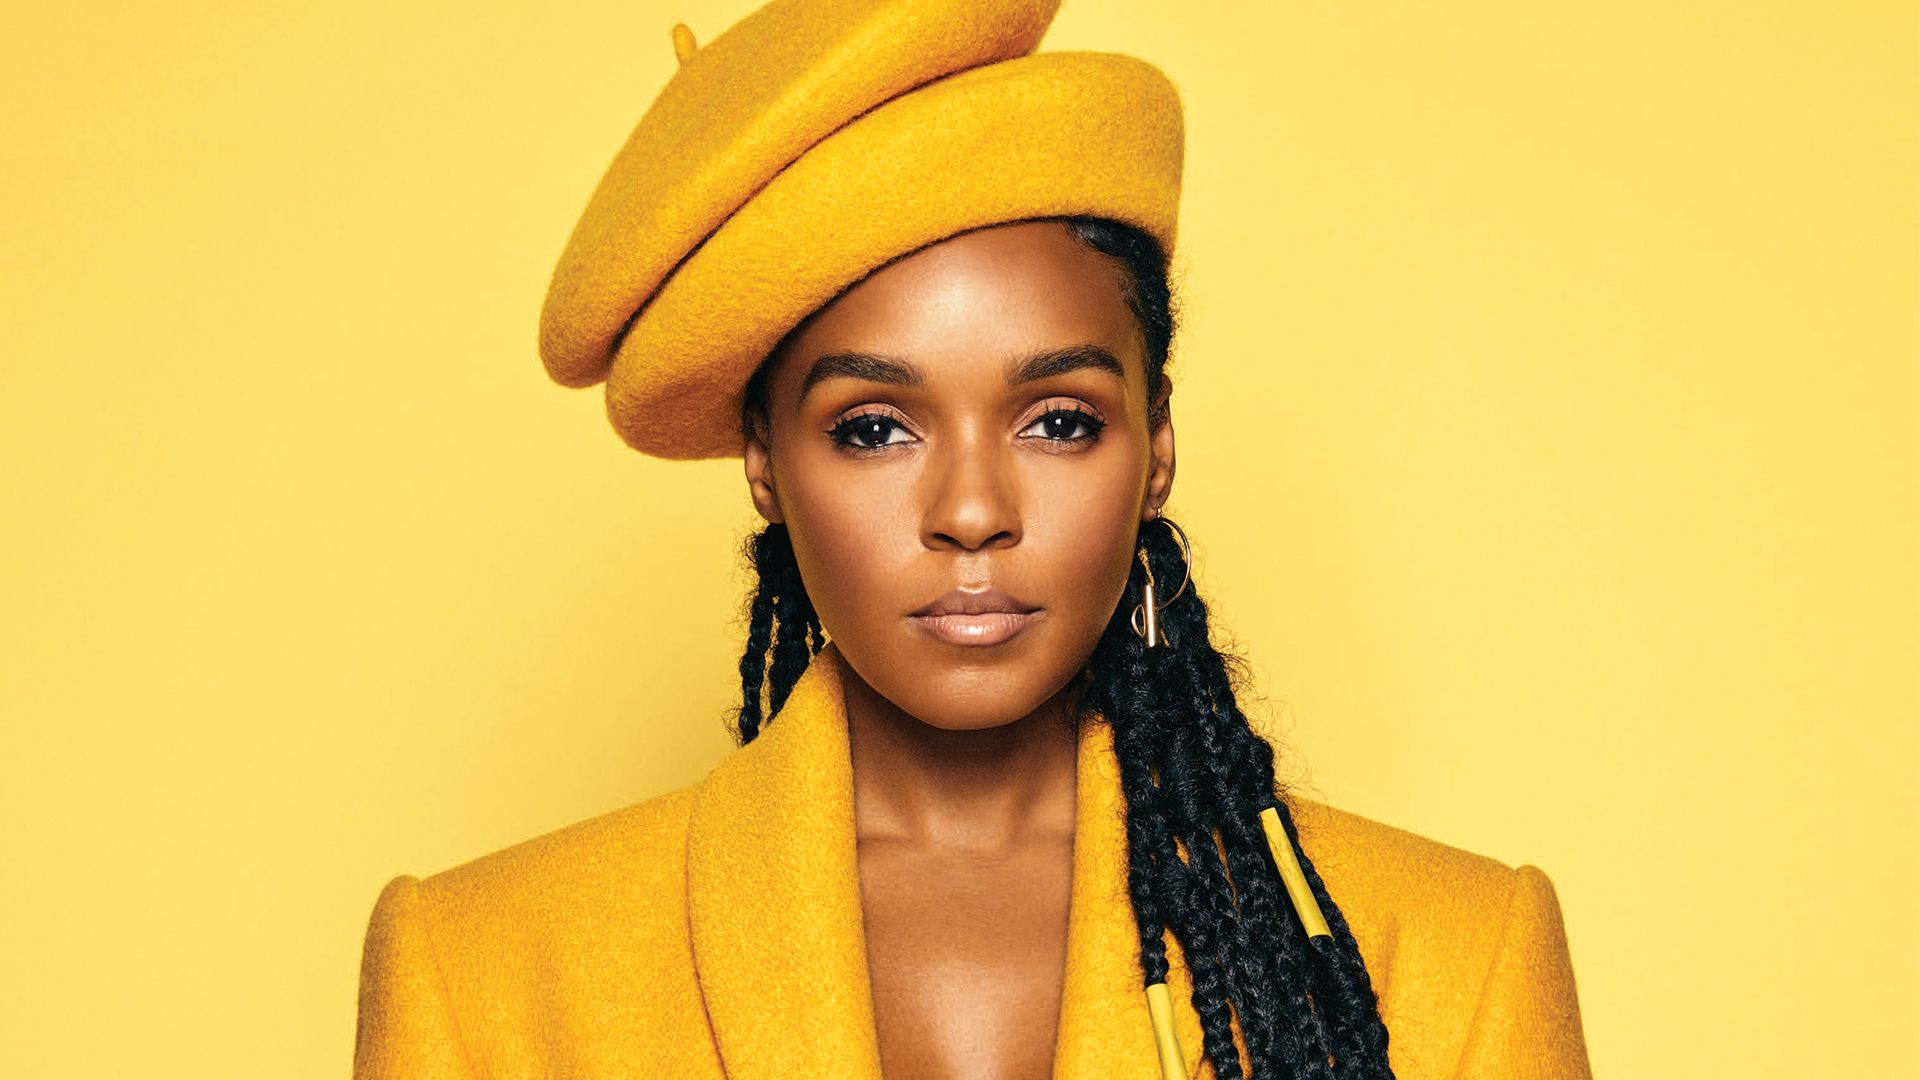 Janelle Monae on 'Homecoming' Season 2 & Local Initiative Support